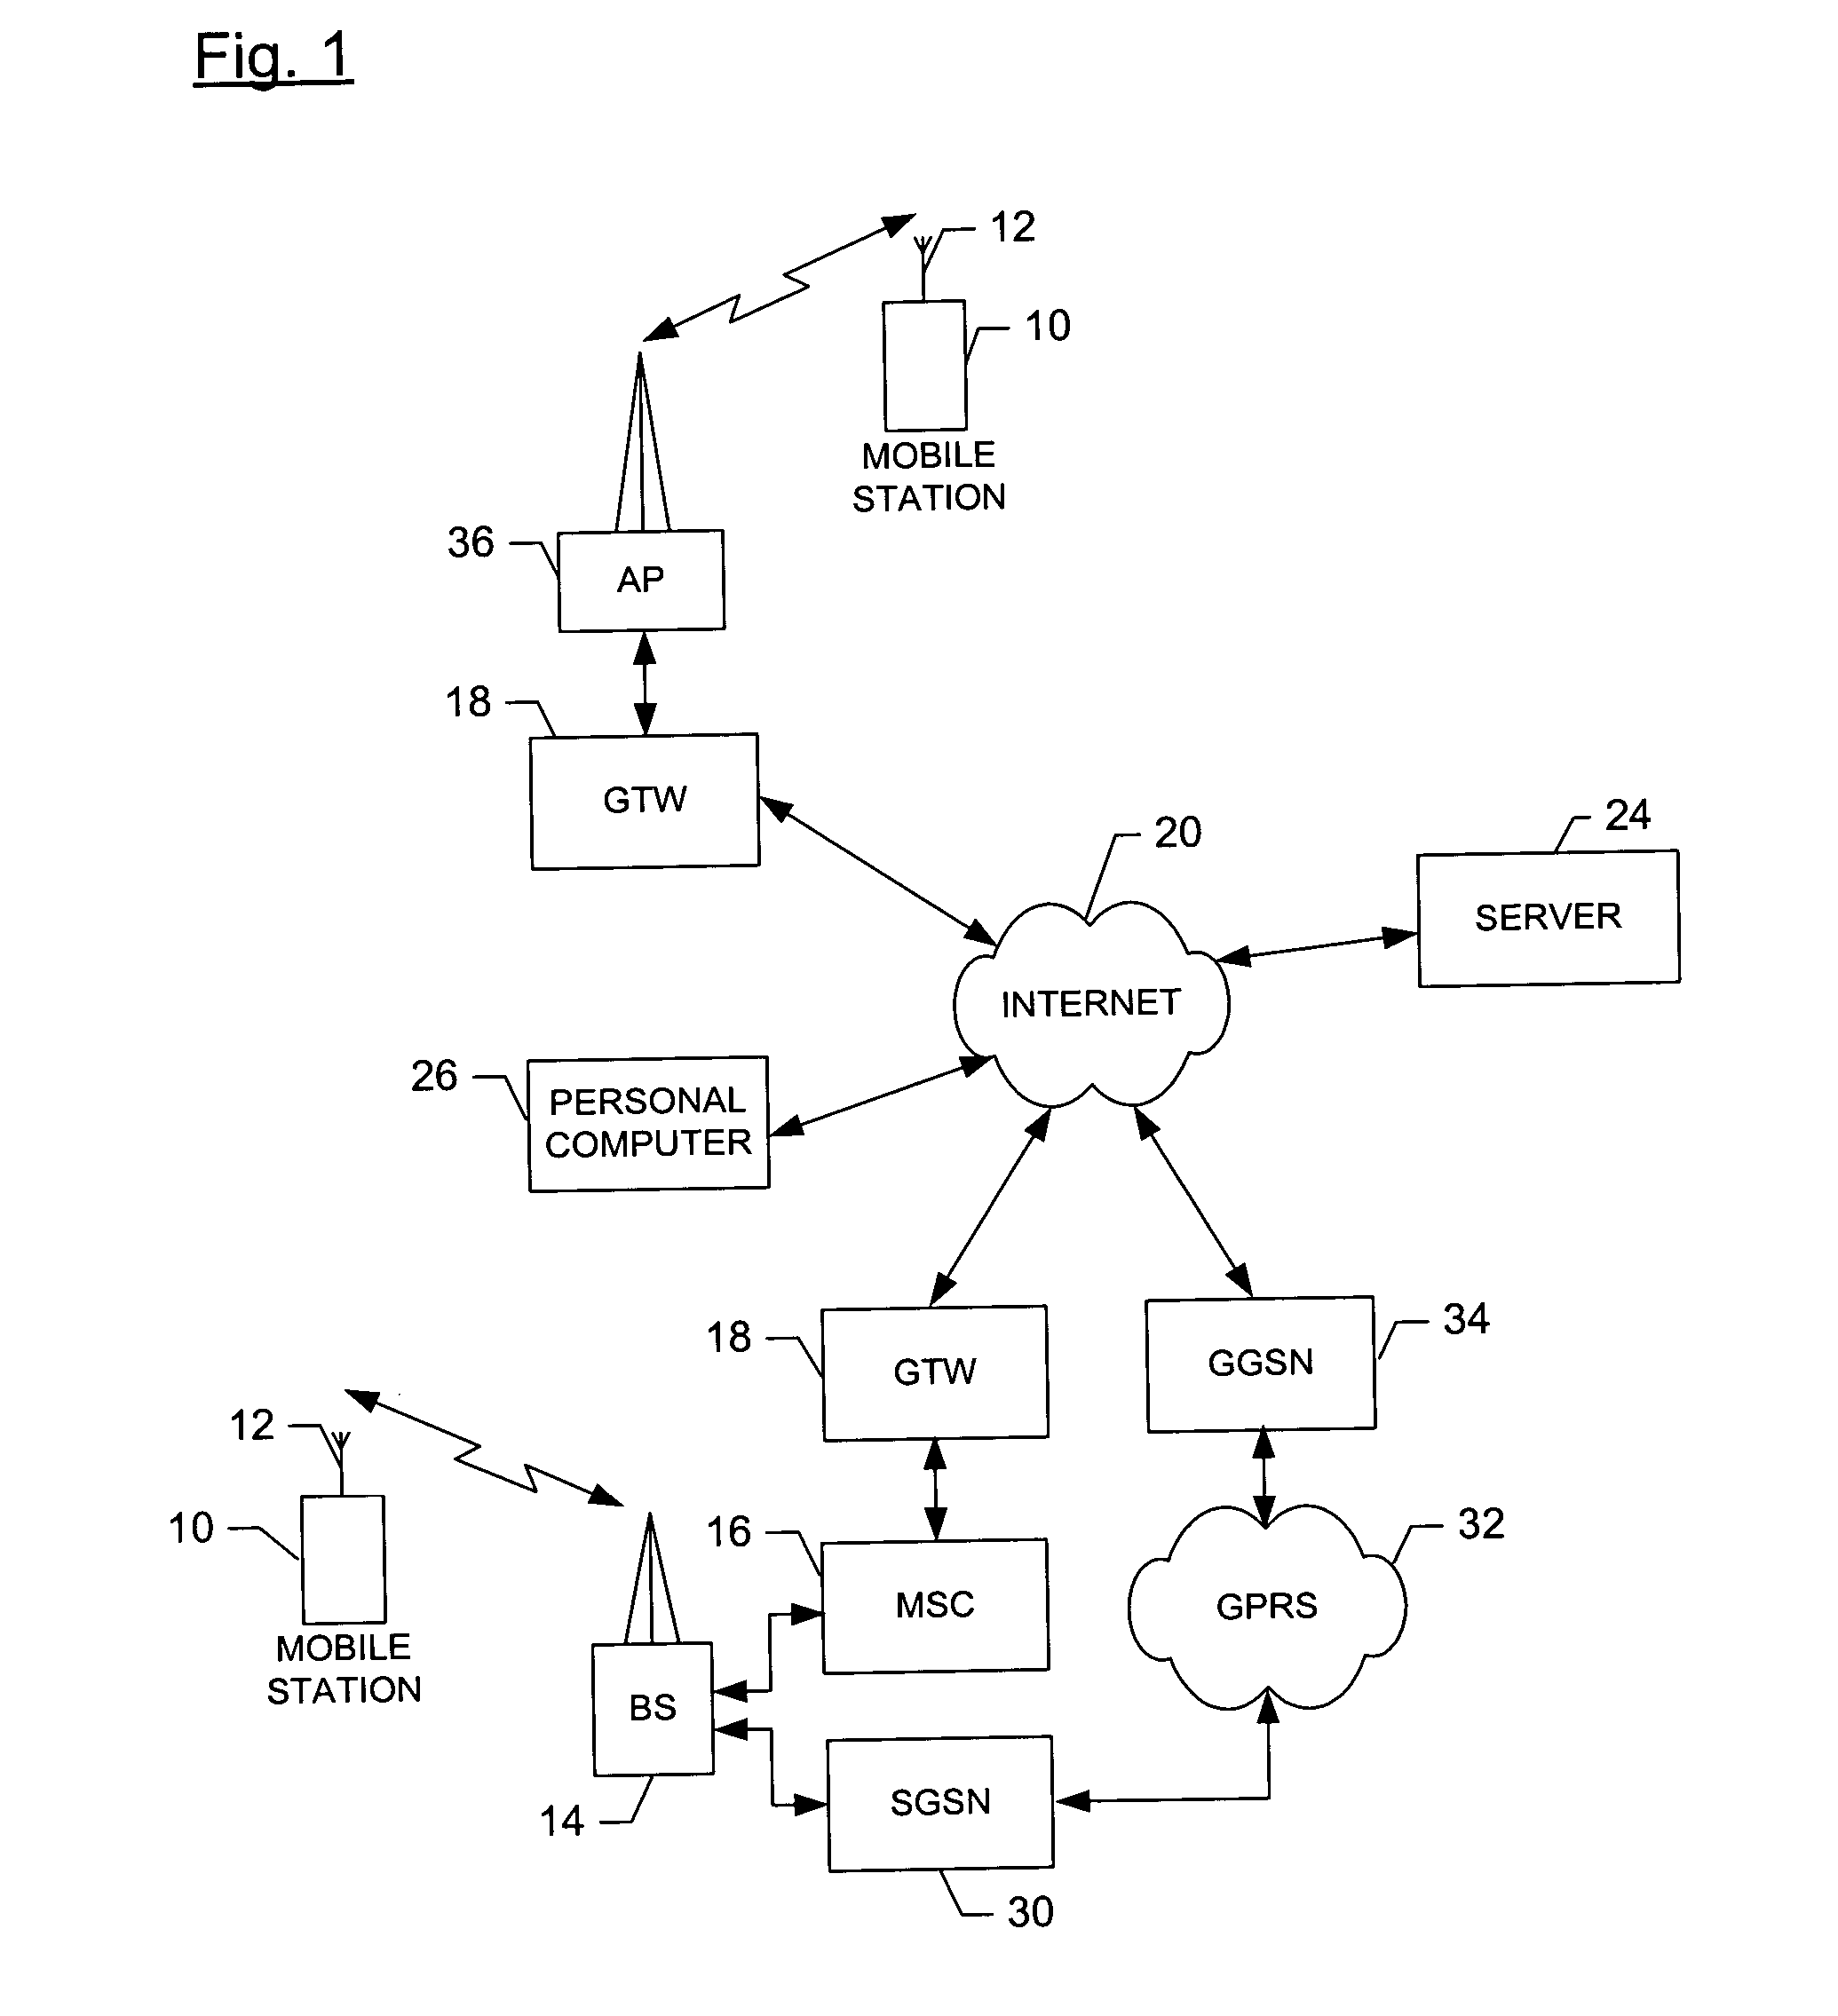 Terminal and computer program product for replying to an email message using one of a plurality of communication methods